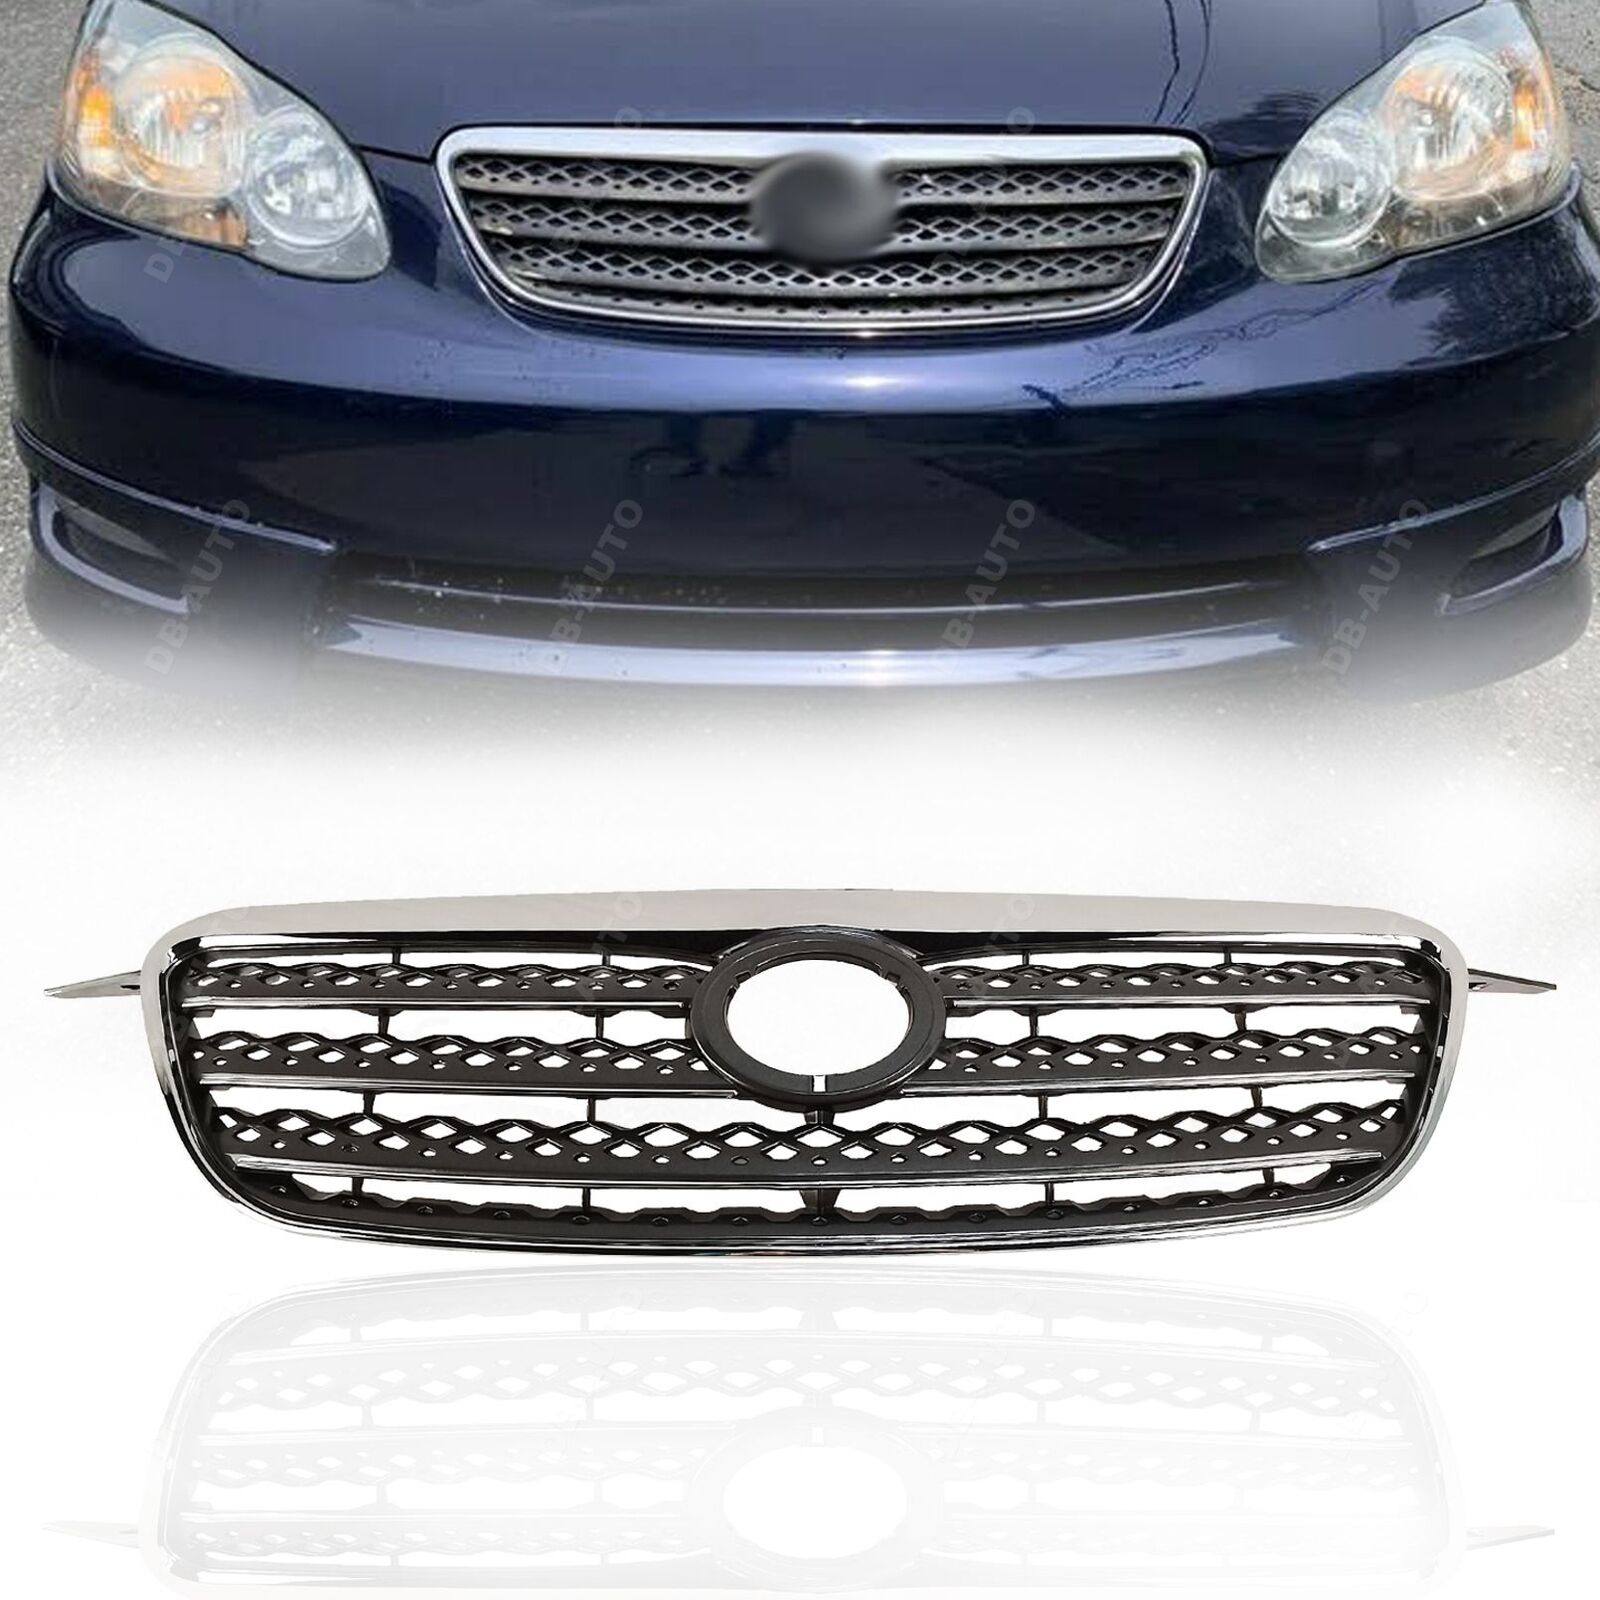 Grille Assembly For 2005-2008 Toyota Corolla Chrome Shell With Dark Gray Insert